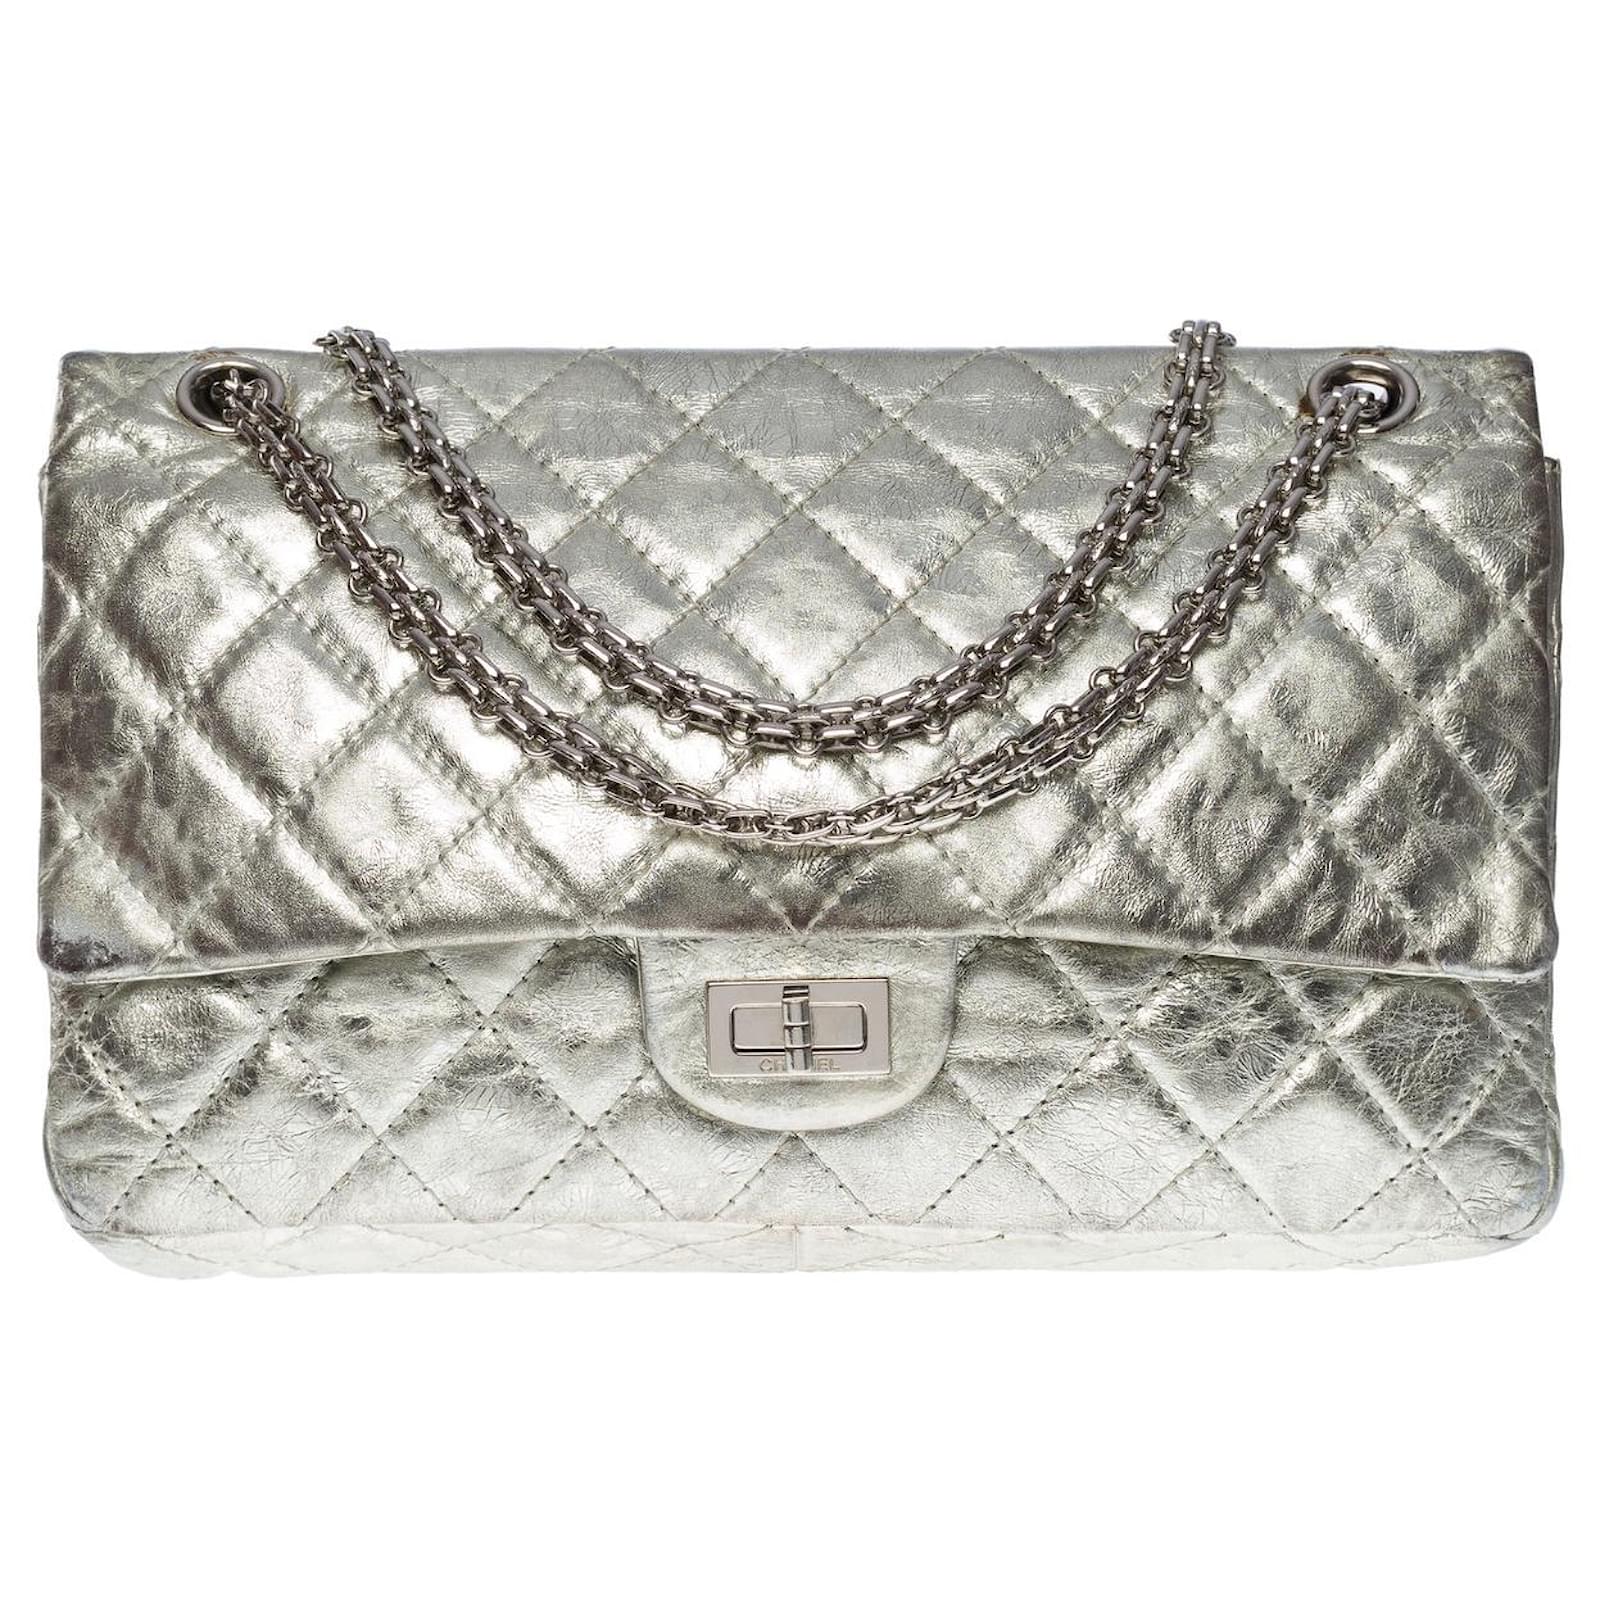 Handbags Chanel Chanel Bag 2.55 in Silver Leather - 101159